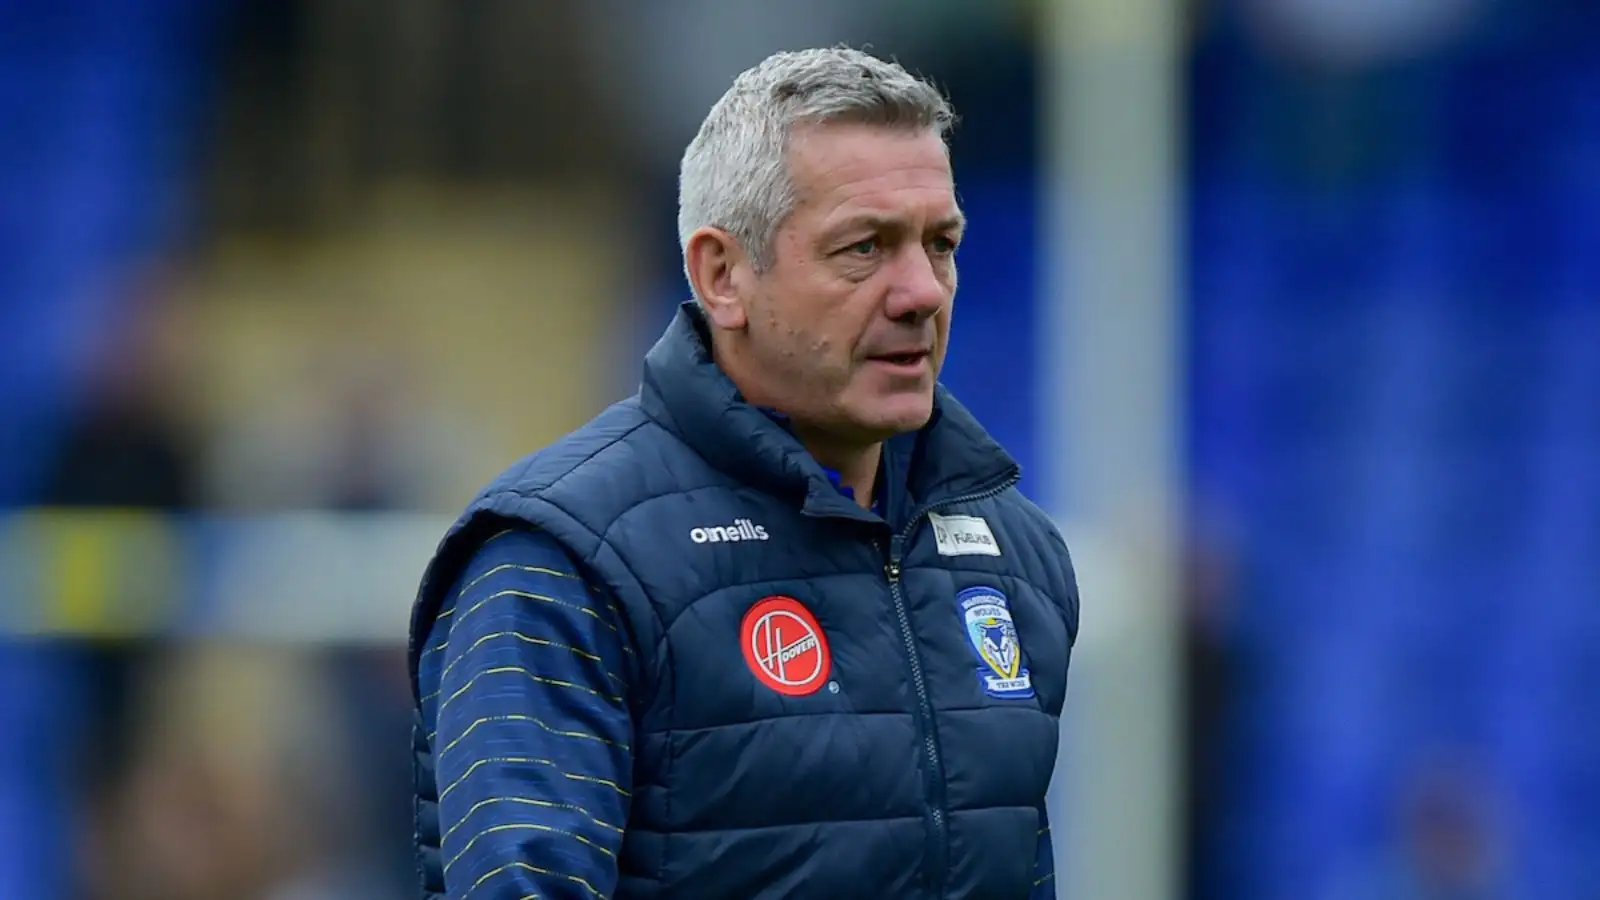 Daryl Powell names ‘phenomenal’ stand out player in defeat: ‘Everything he did was international class’